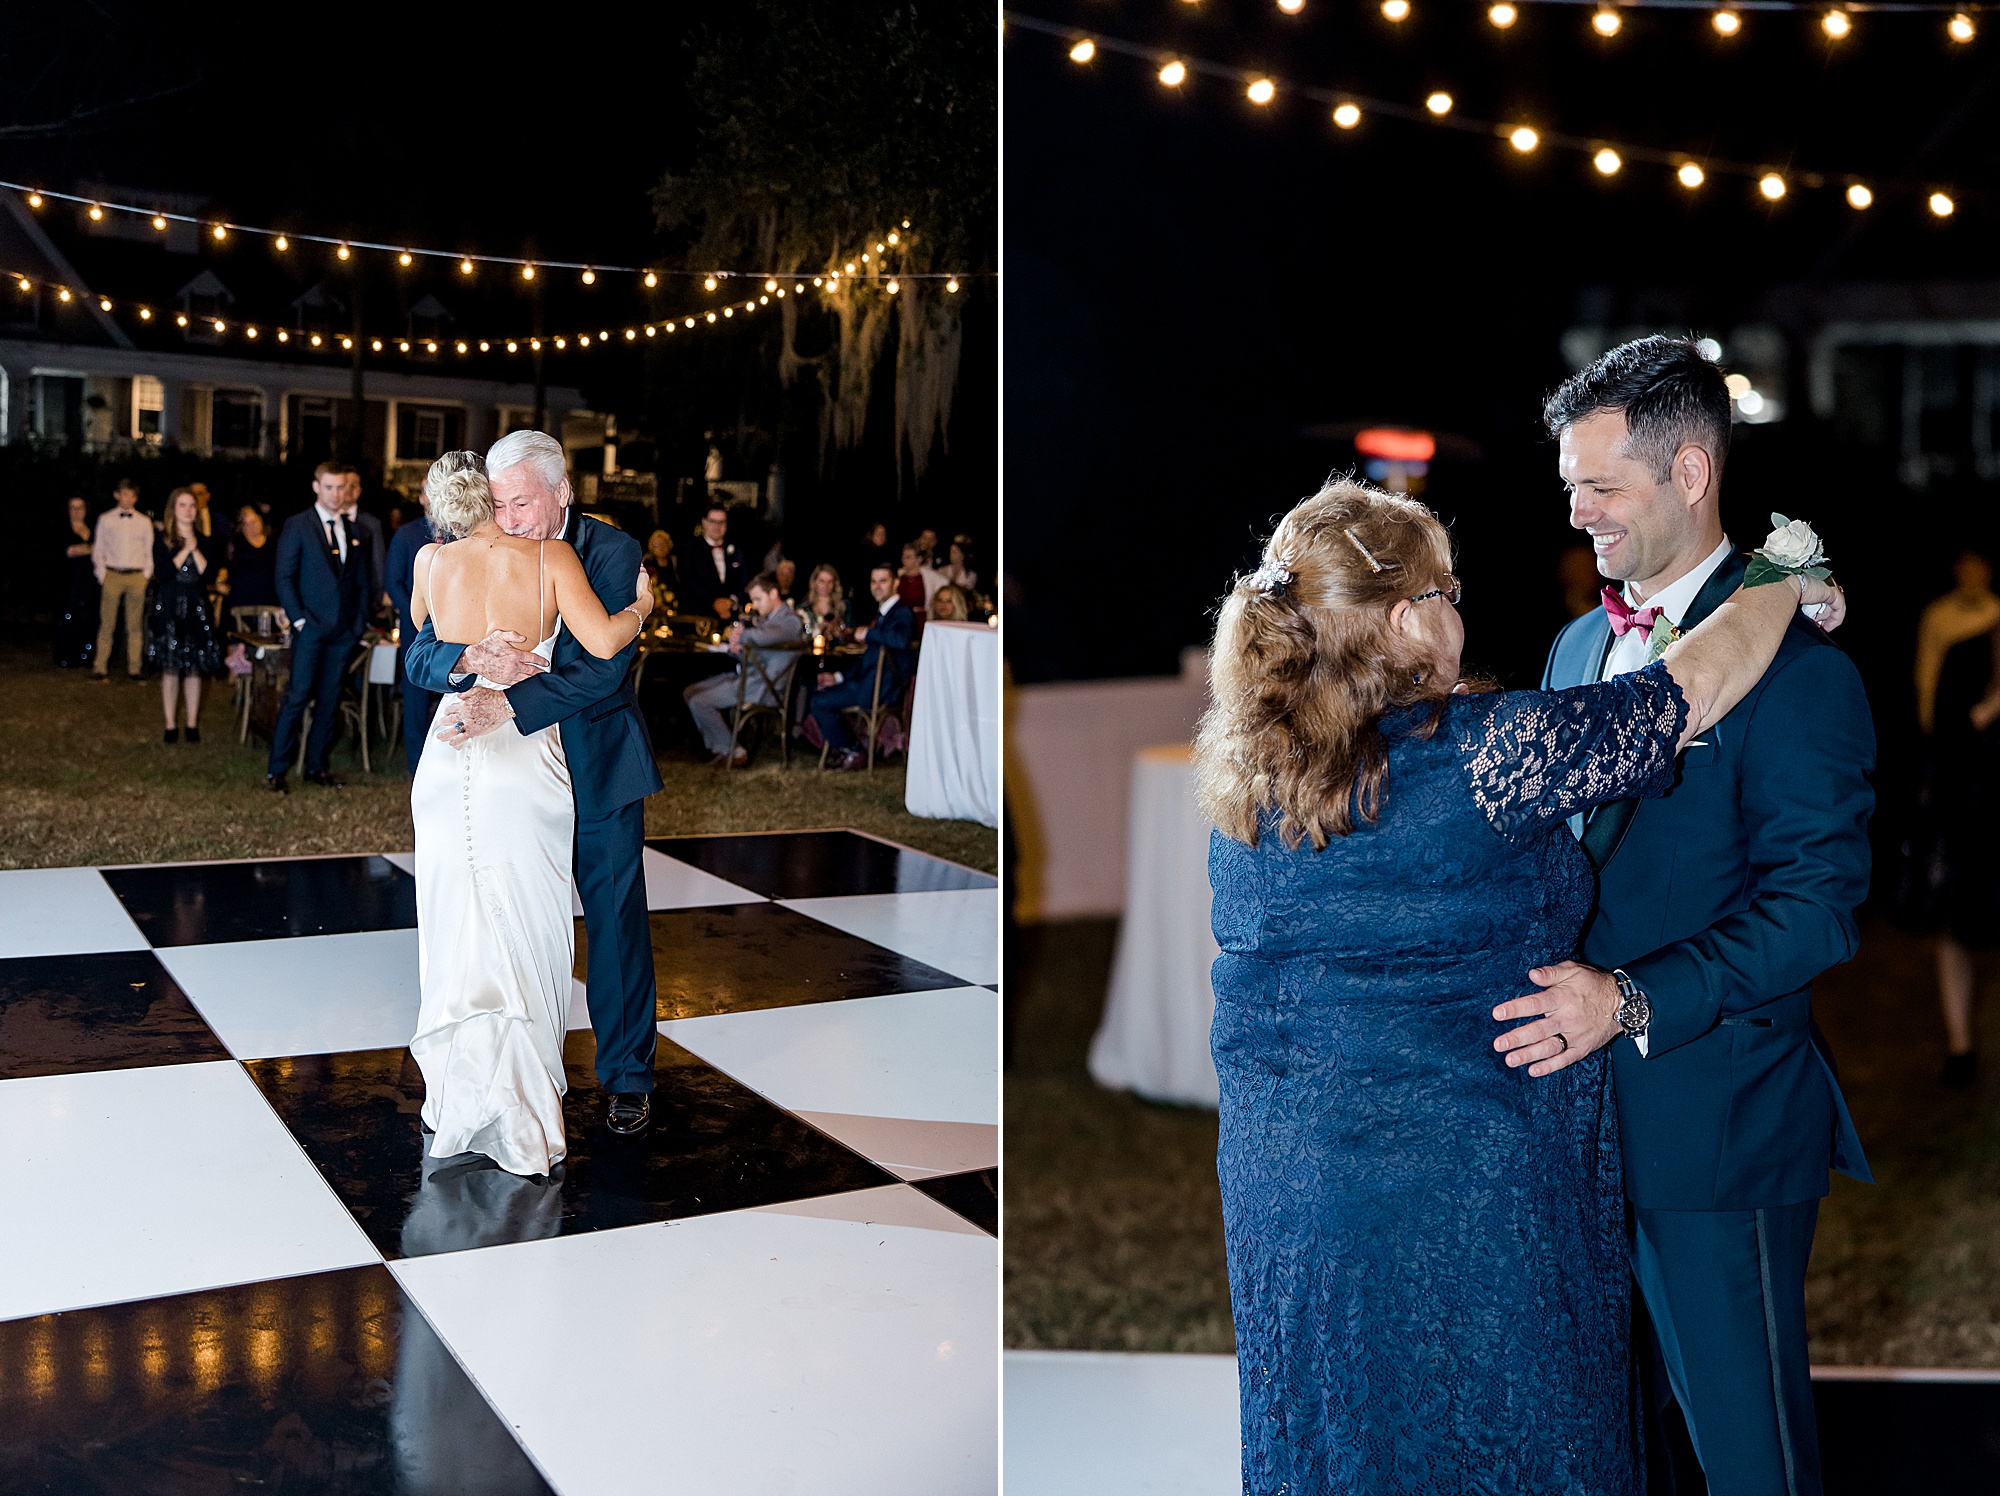 father-daughter dance and mother-son dance